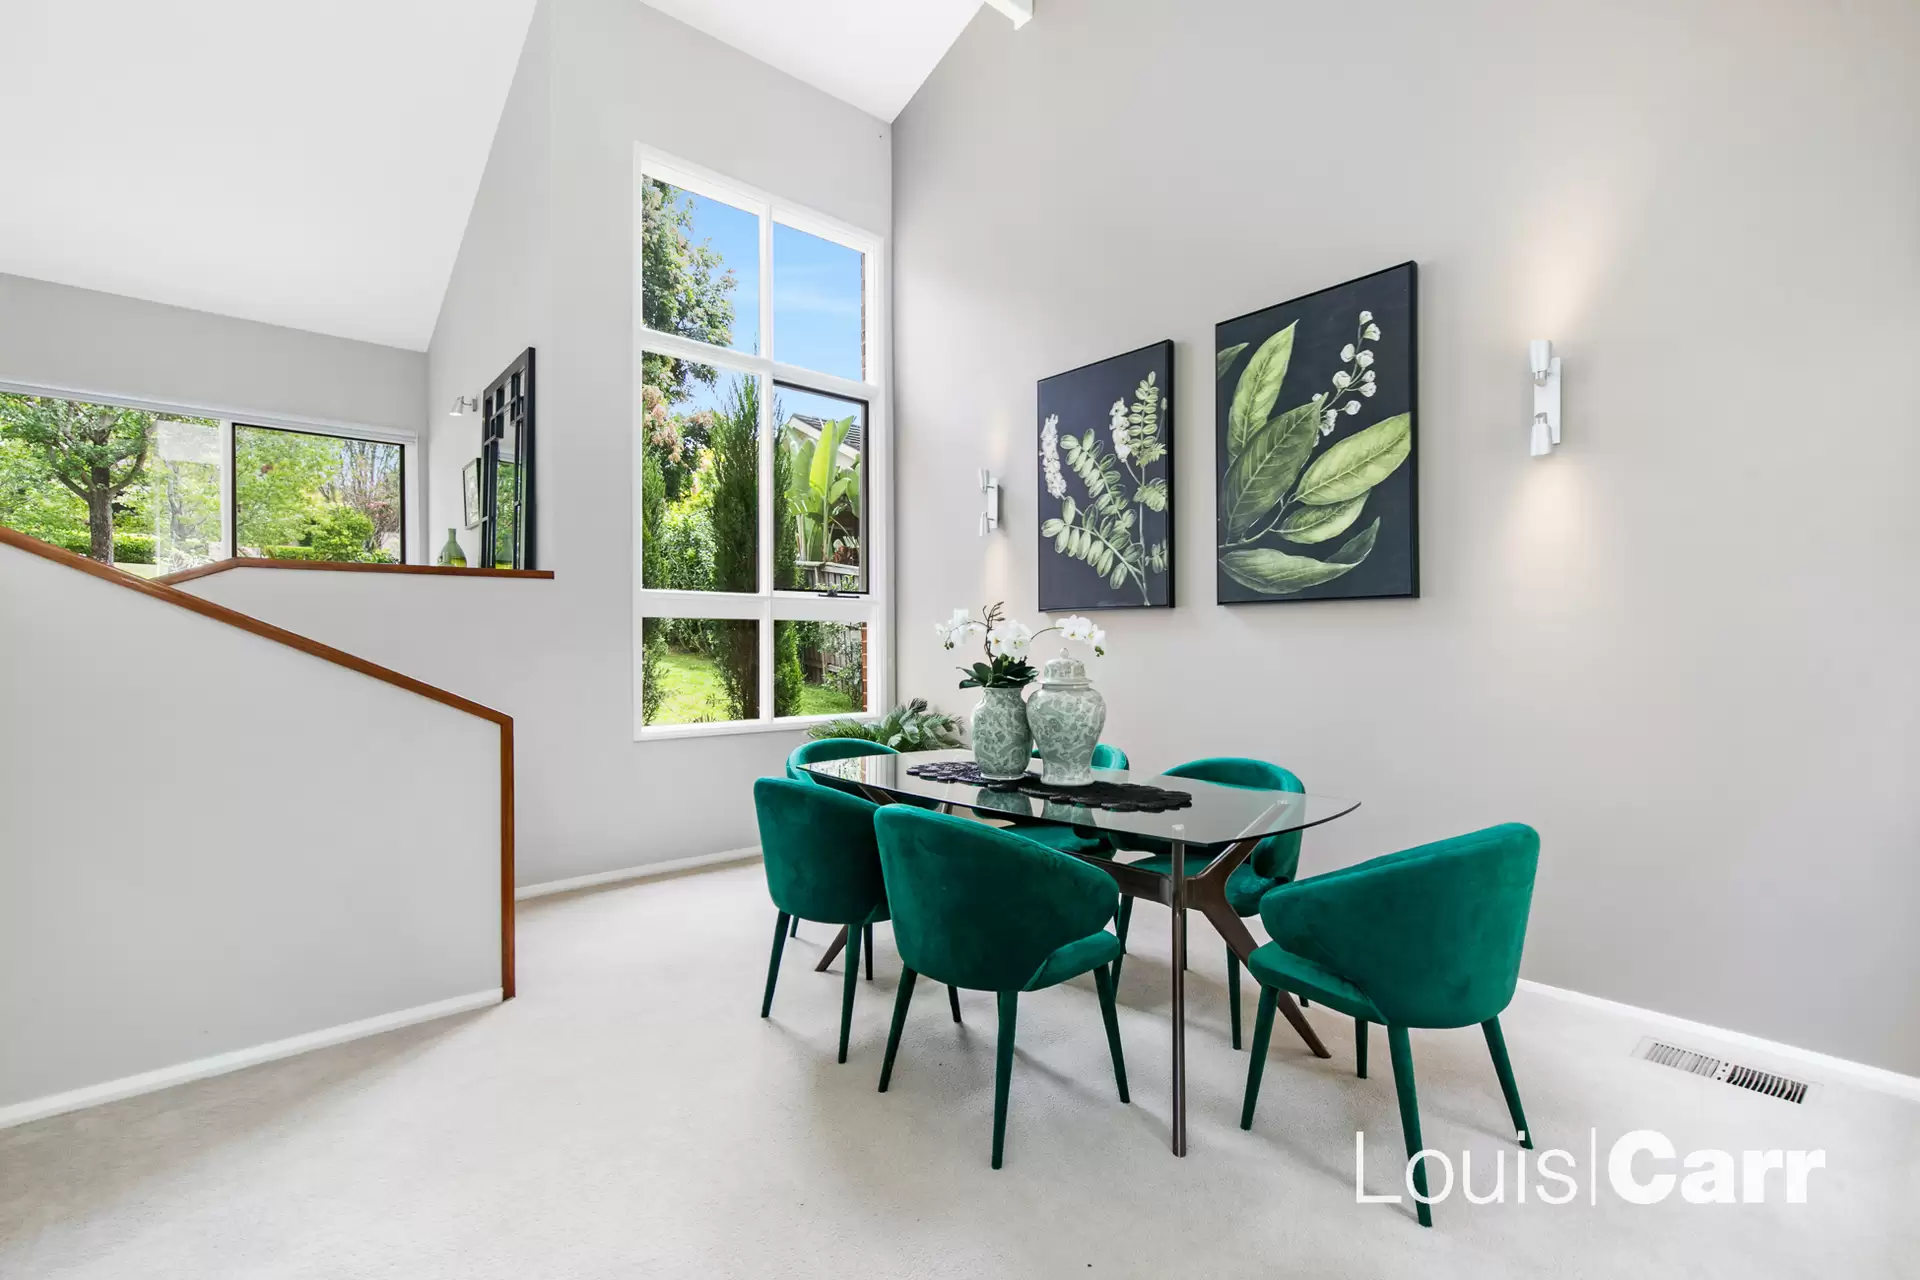 Photo #7: 78 Alana Drive, West Pennant Hills - For Sale by Louis Carr Real Estate